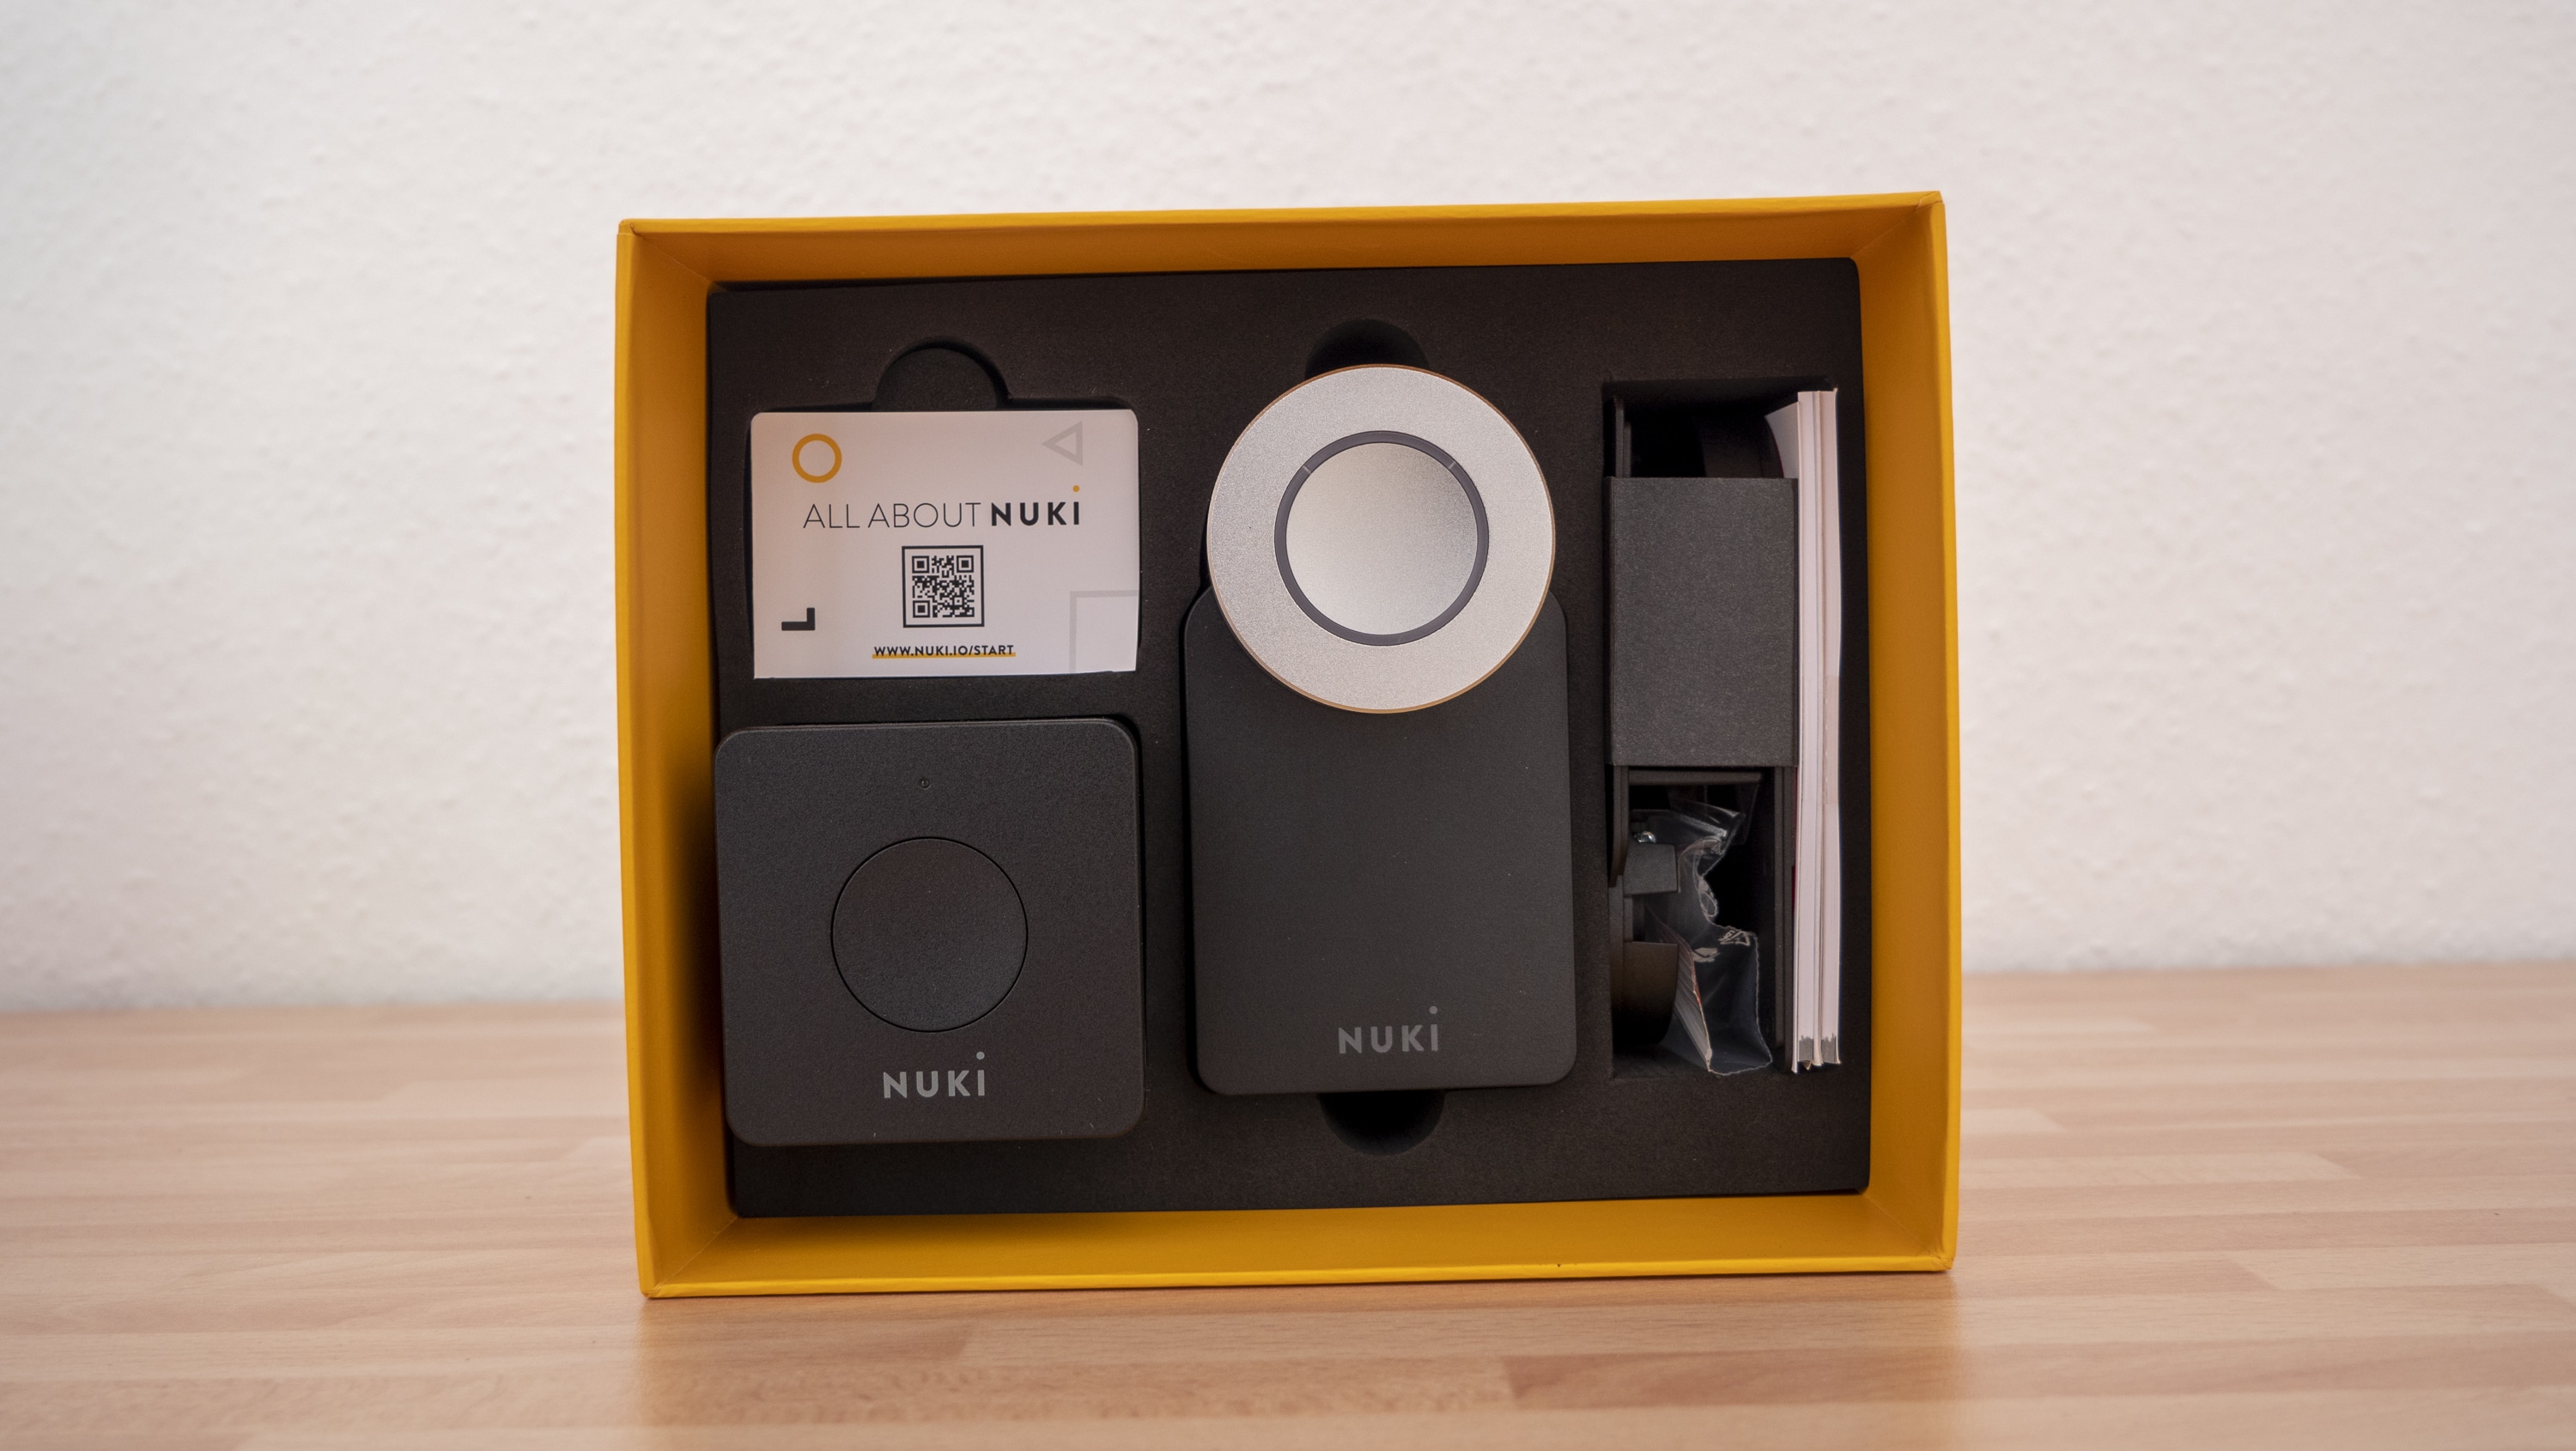 Nuki Opener: Certified Secure Smart Home Product and IFTTT Update - Nuki